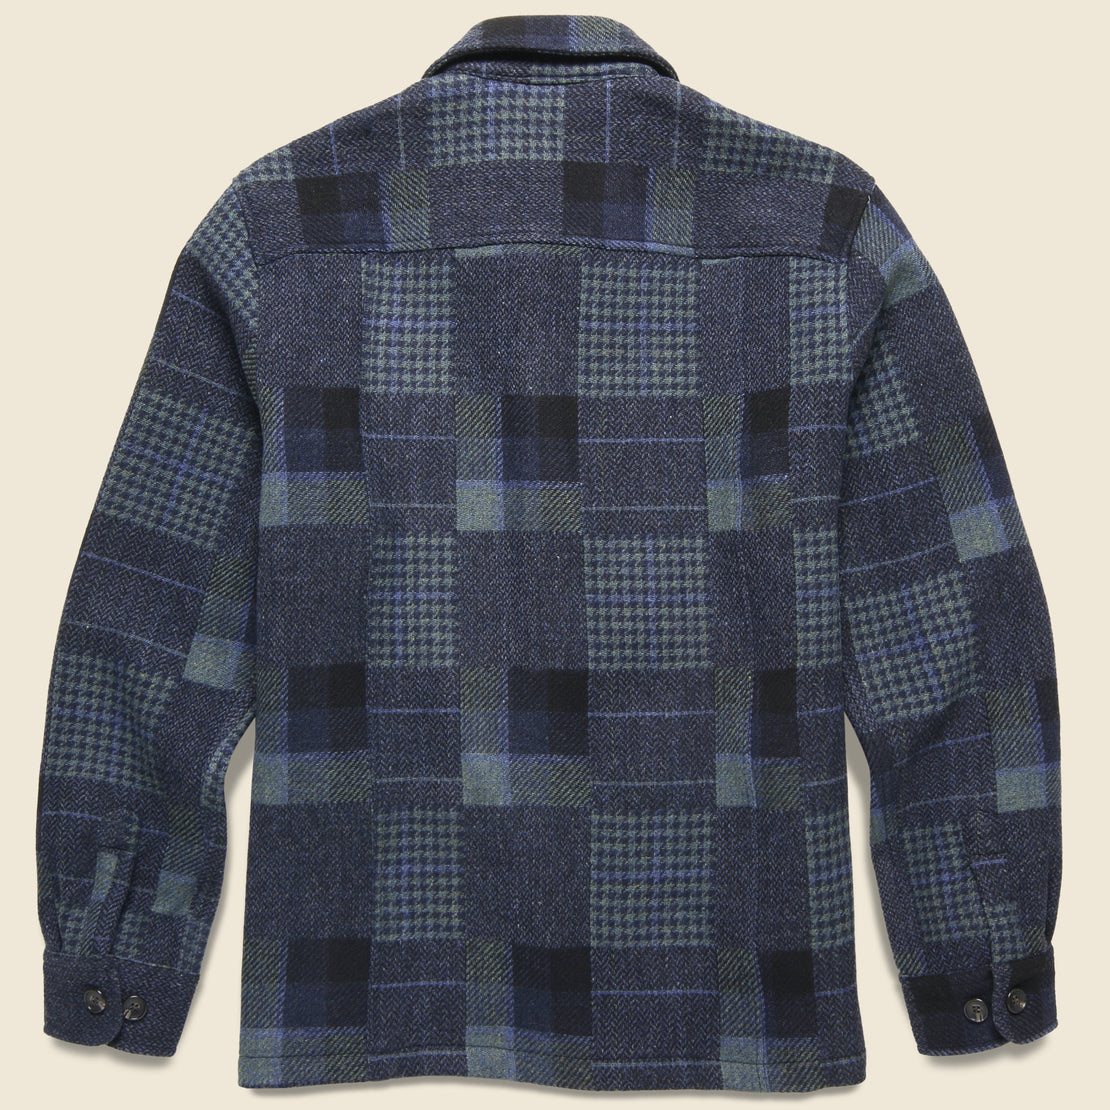 Patchwork Overshirt - Blue - Corridor - STAG Provisions - Outerwear - Shirt Jacket